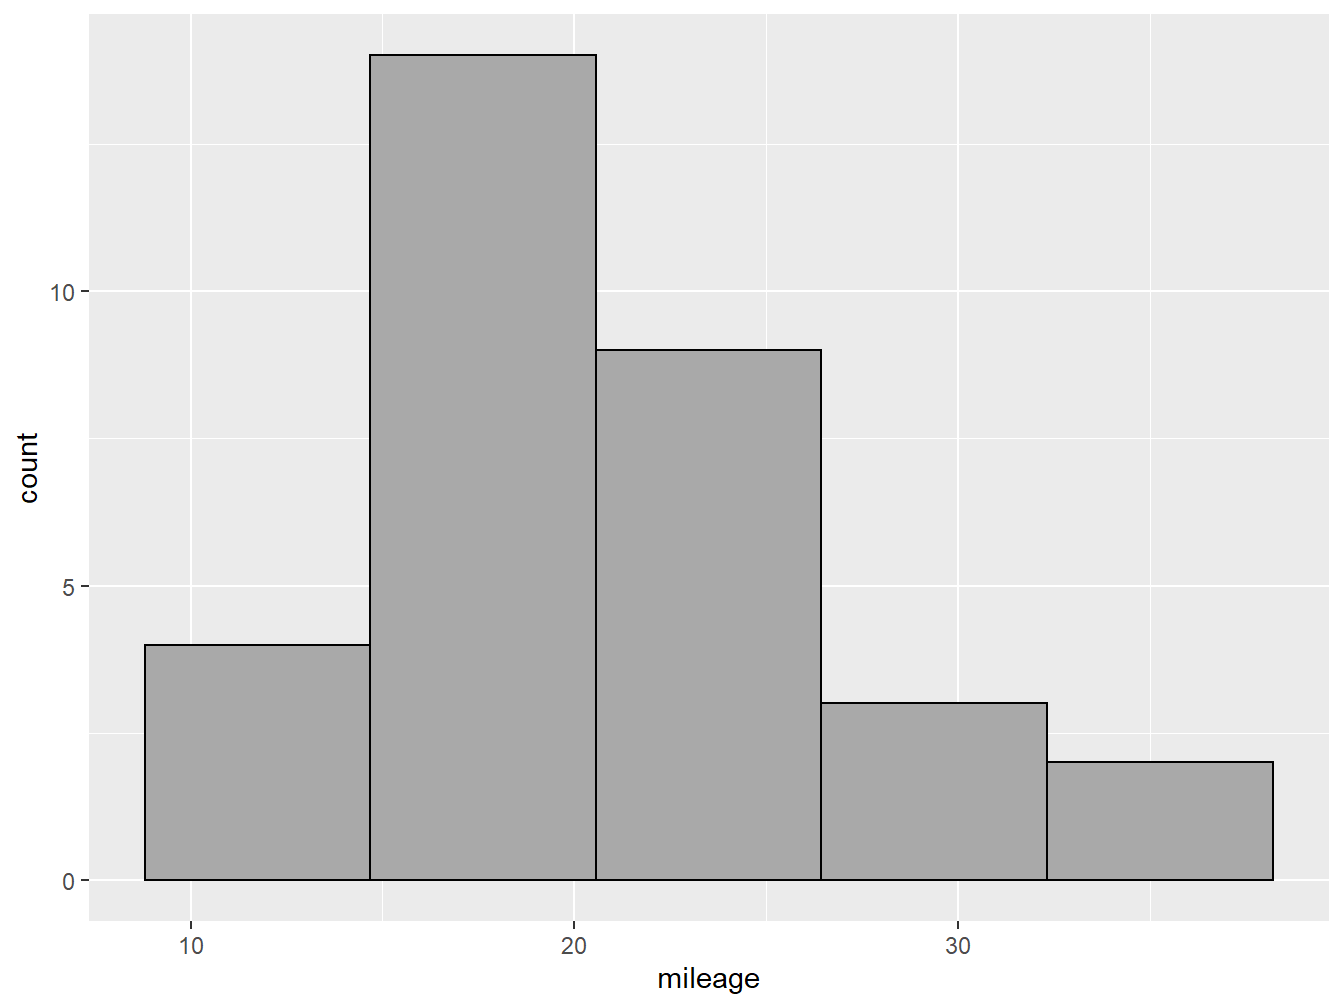 A nicer looking histogram